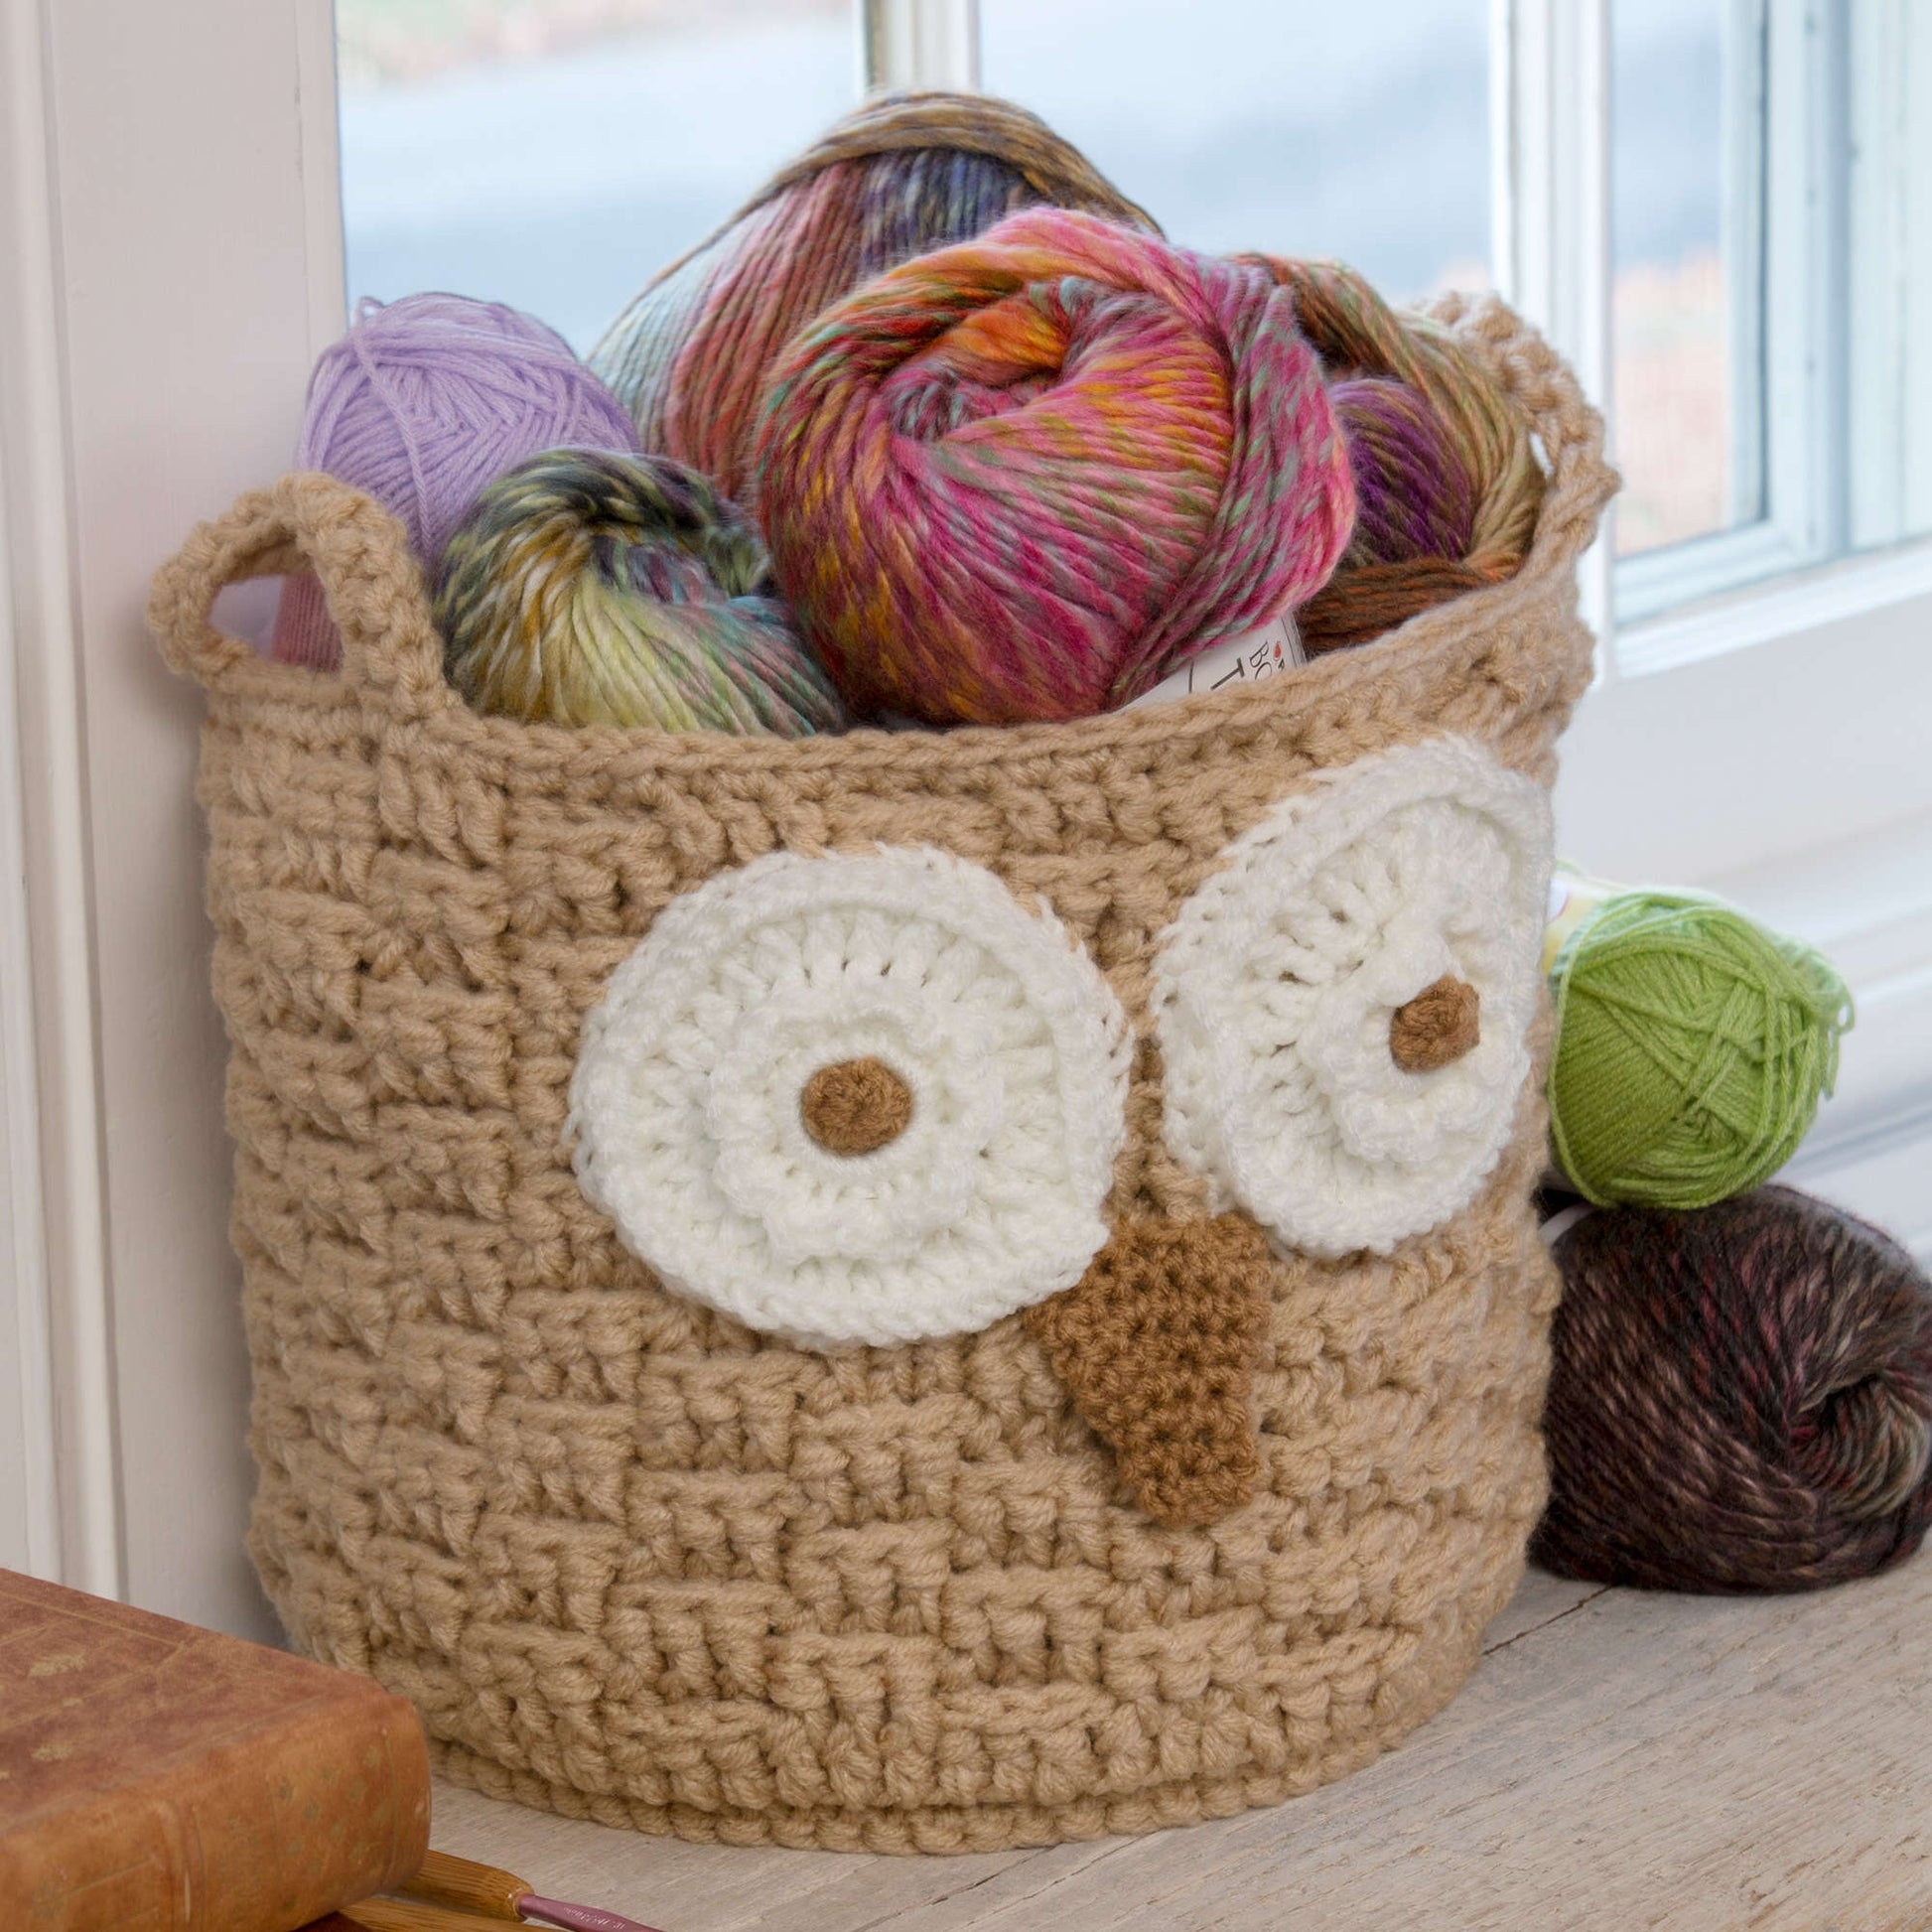 Free Red Heart It's a Hoot Owl Container Crochet Pattern